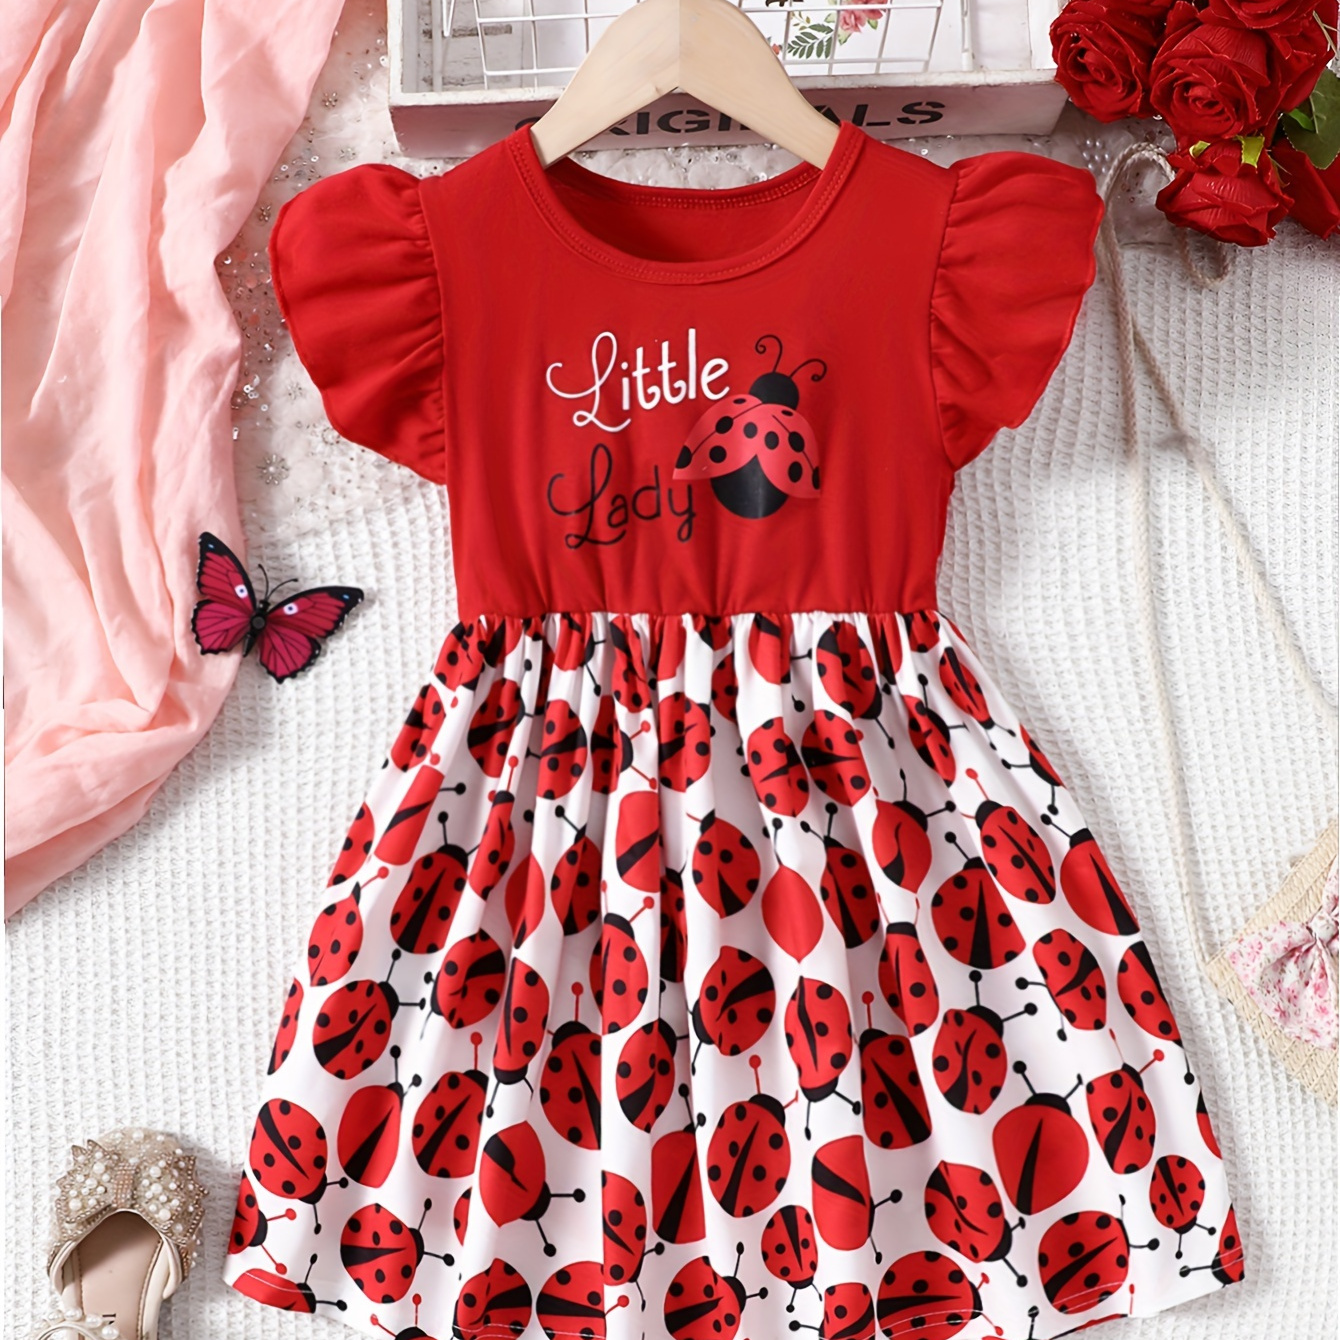 

Baby's "little Lady" Print Casual Dress, Casual Cap Sleeve Dress, Infant & Toddler Girl's Clothing For Summer/spring, As Gift